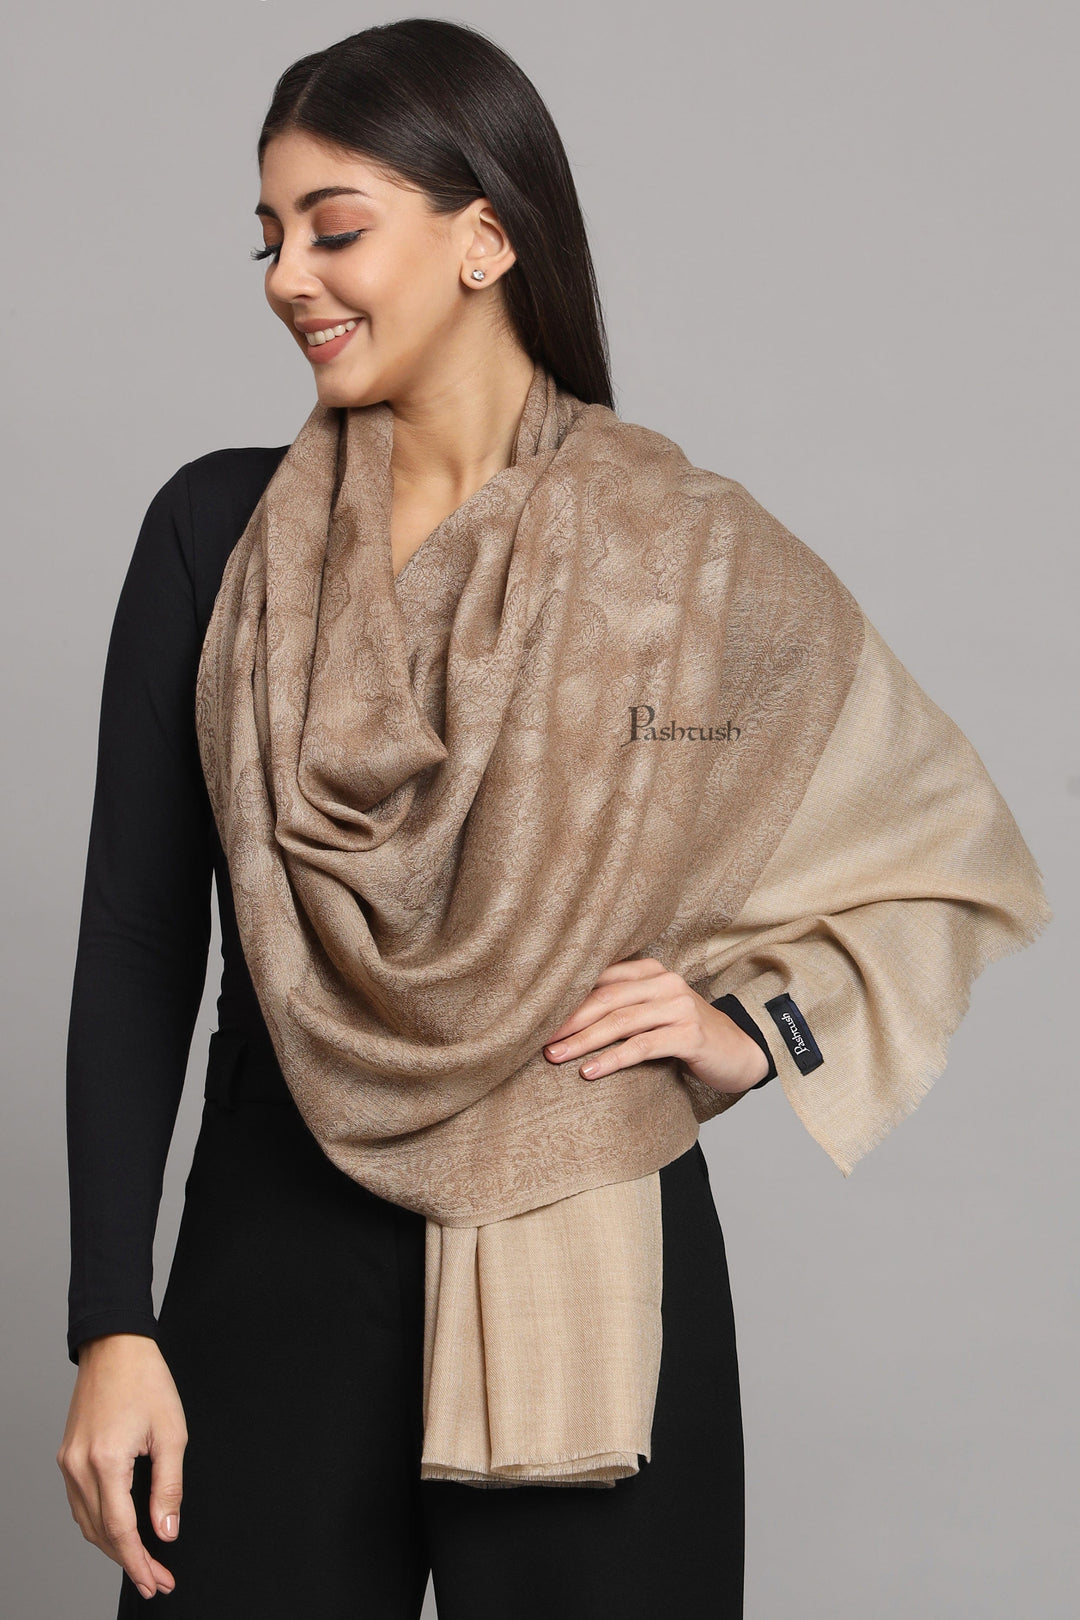 Pashtush India Womens Stoles and Scarves Scarf Pashtush womens Fine Wool stole, pasiley weave design, Taupe